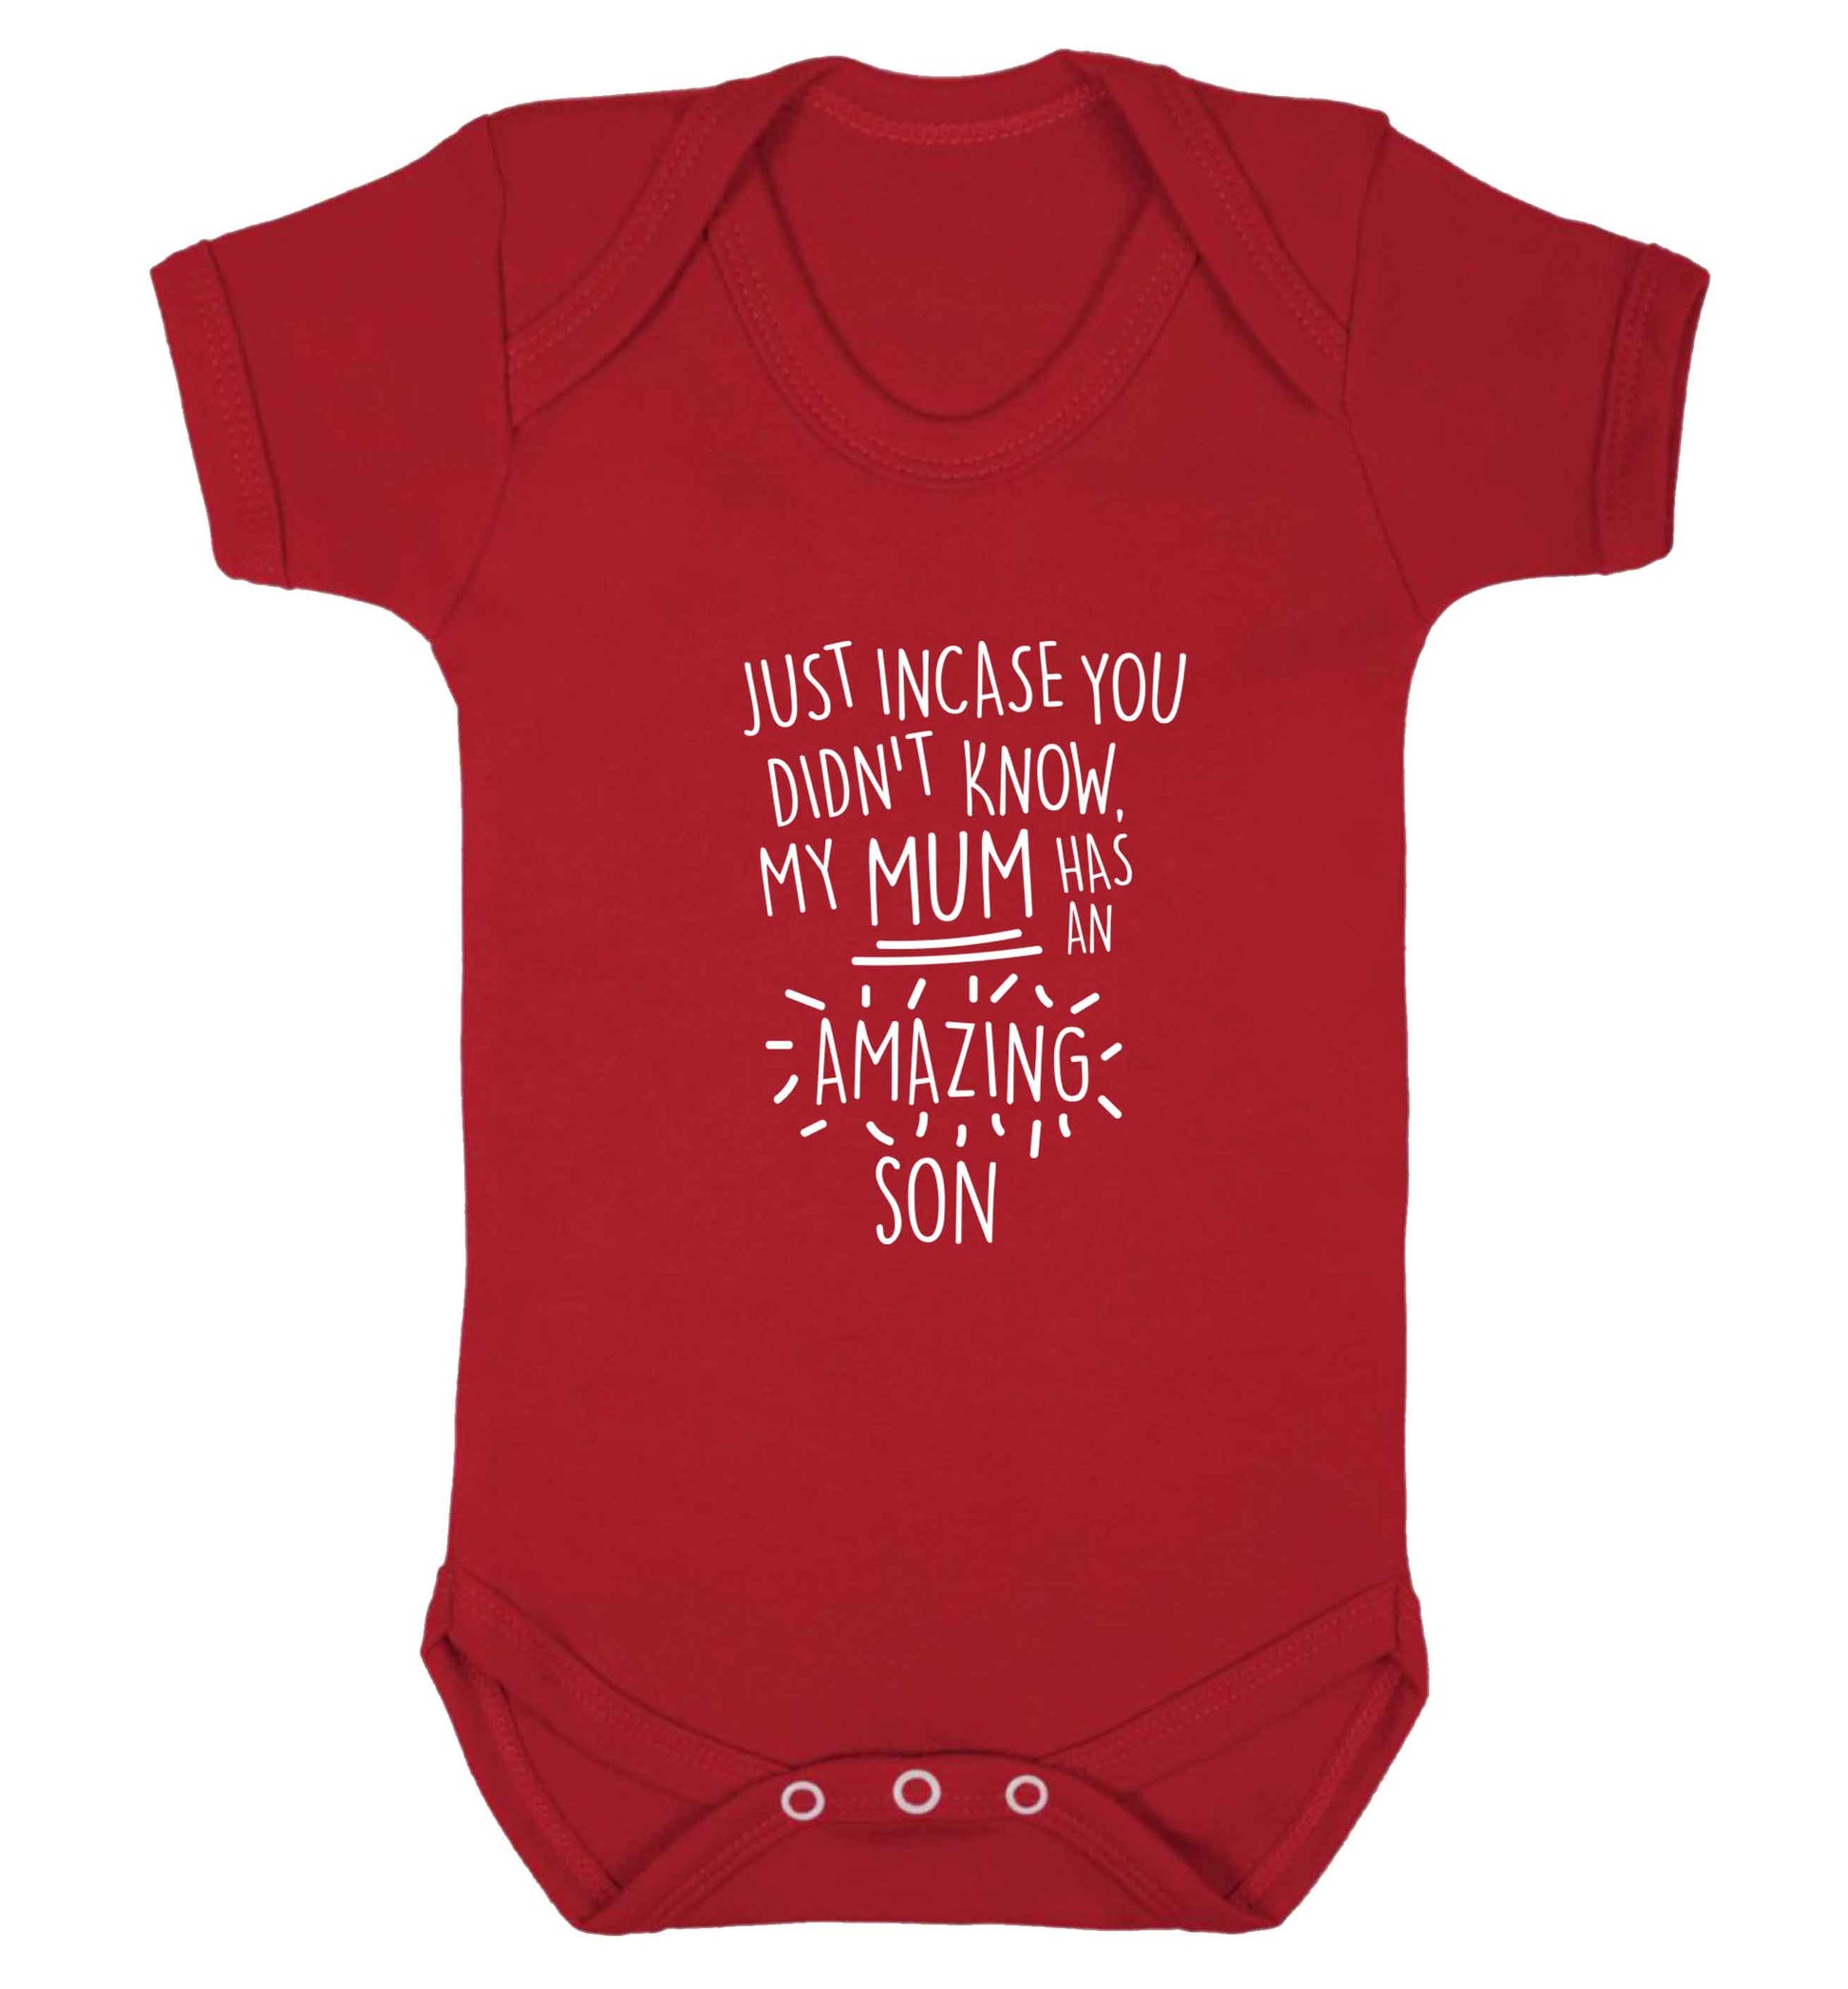 Just incase you didn't know my mum has an amazing son baby vest red 18-24 months